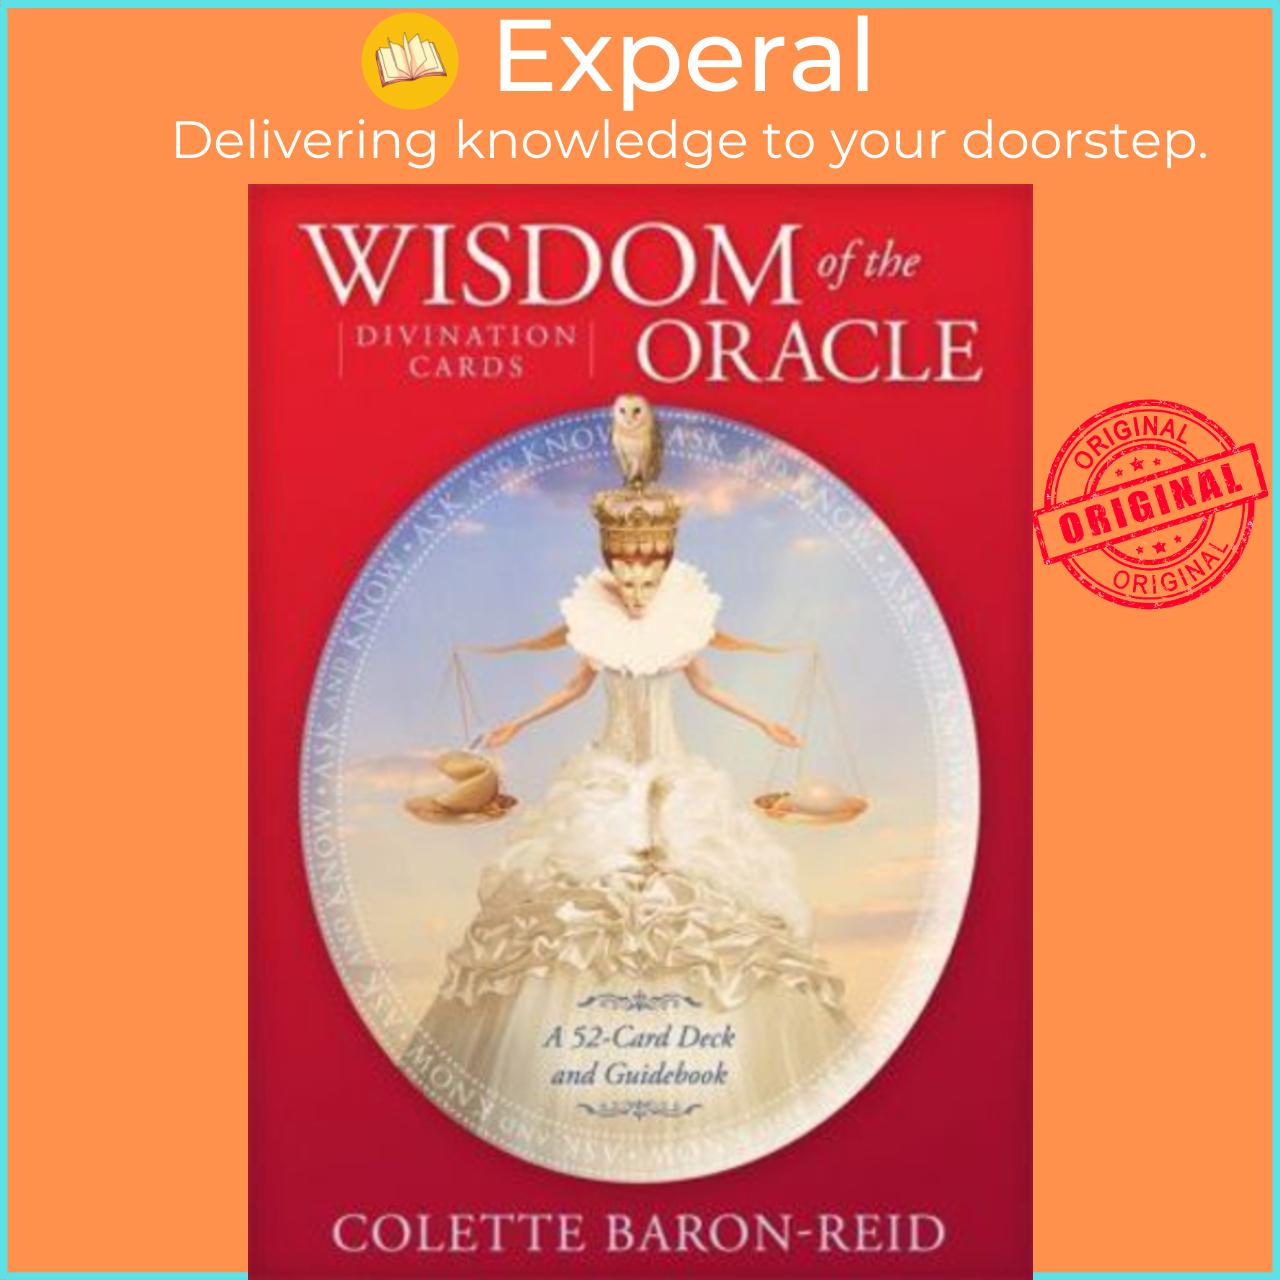 Sách - Wisdom of the Oracle Divination Cards : Ask and Know by Colette Baron-Reid (US edition, paperback)